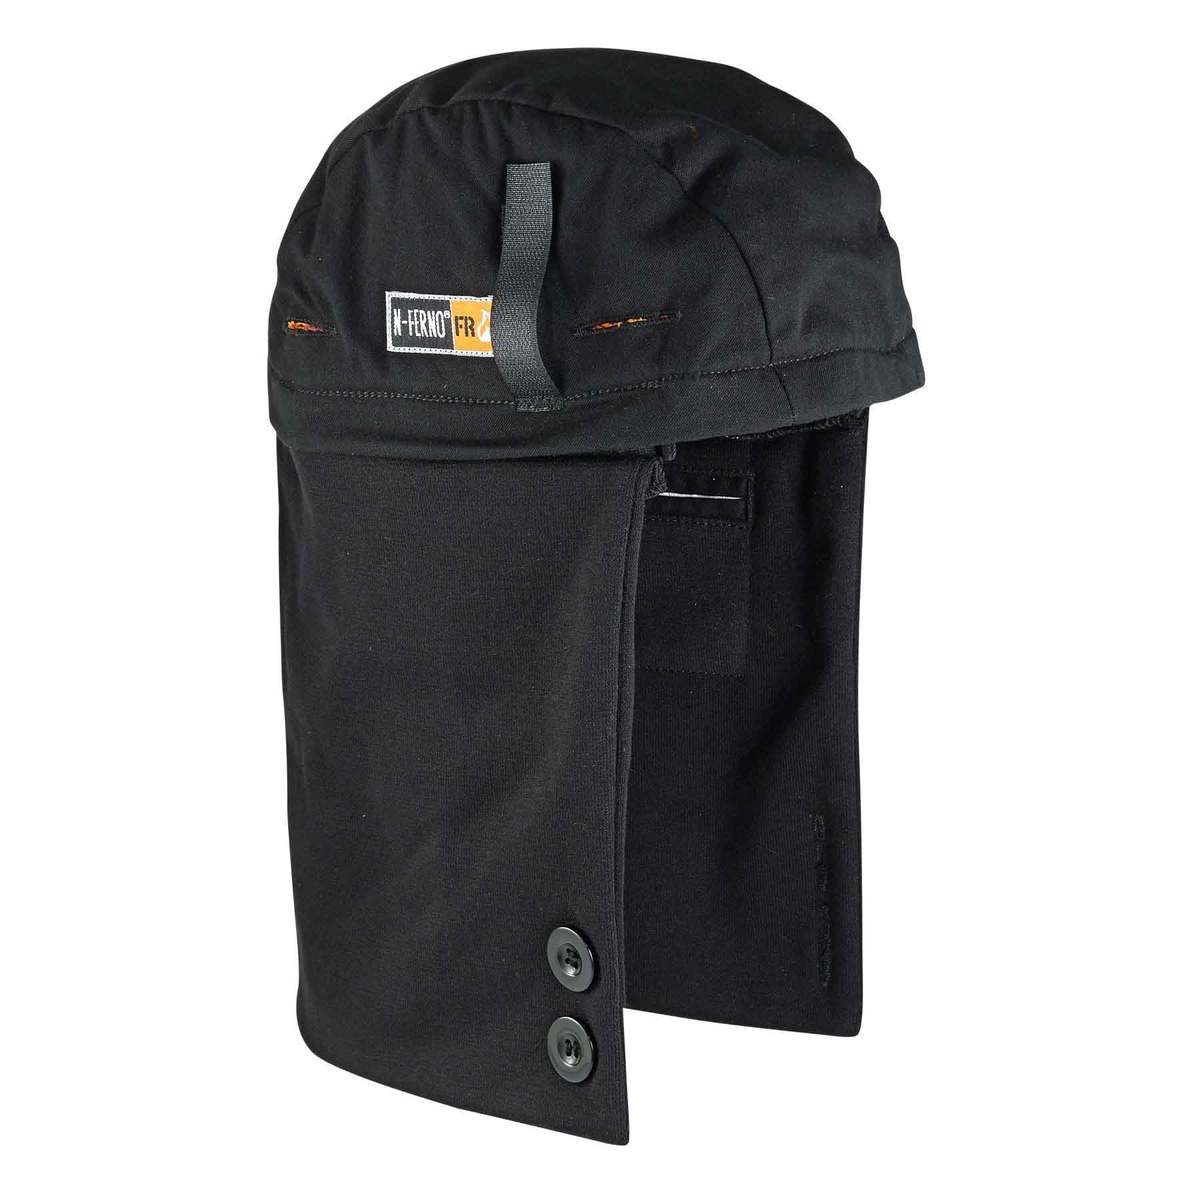 Ergodyne® Black N-Ferno® 6885 Flame Resistant Modacrylic Cotton Blend Winter Liner With Button Closure